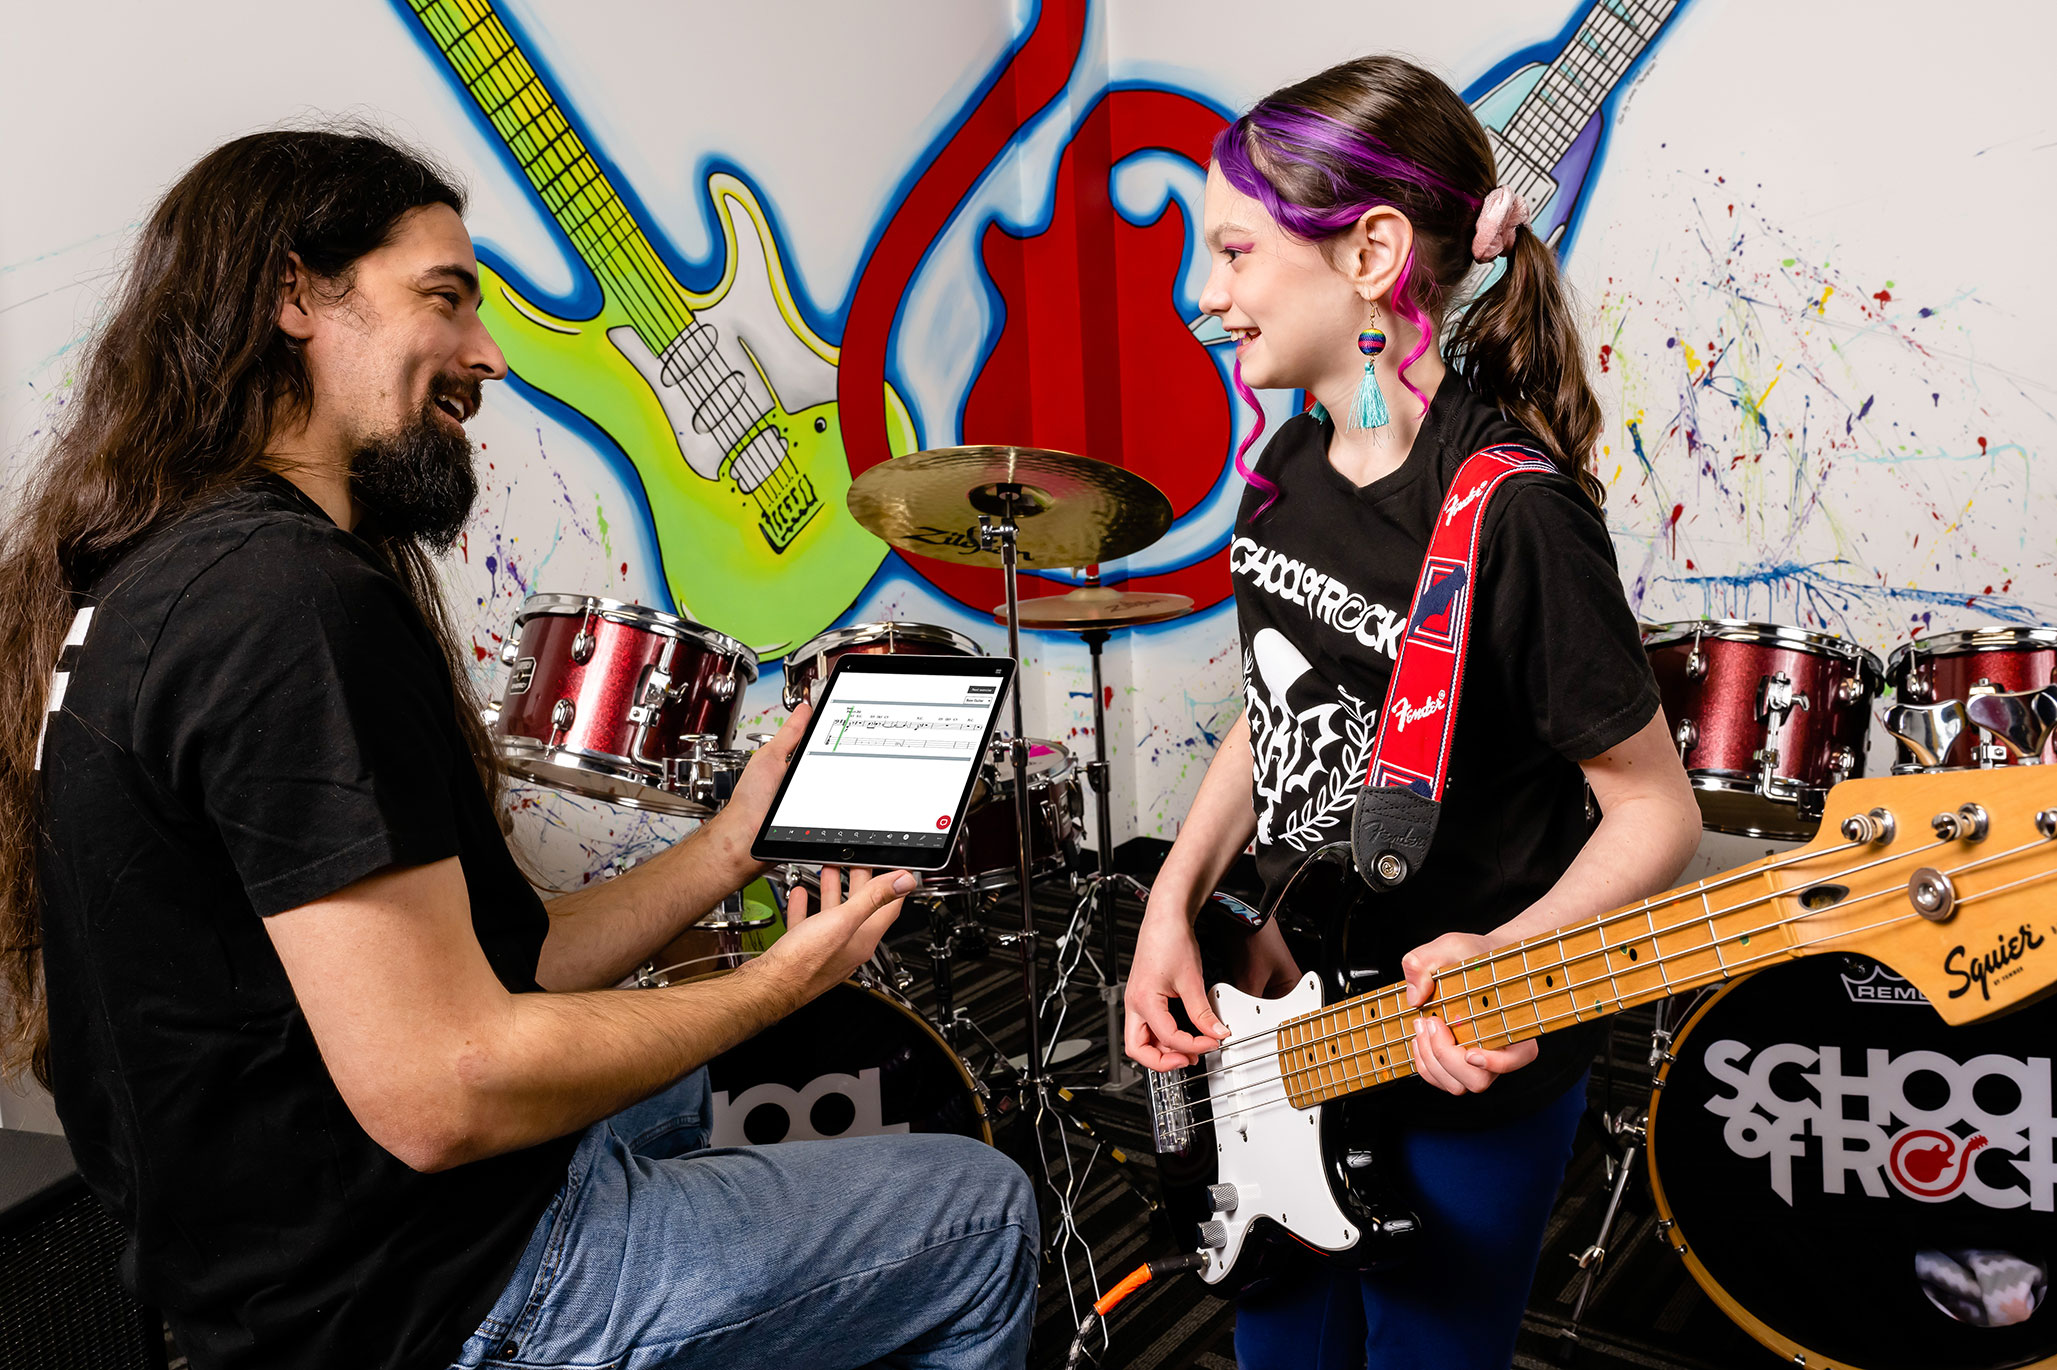 School of Rock students learn theory and techniques via songs from legendary artists such as Aretha Franklin, Lenny Kravitz, and Led Zeppelin.